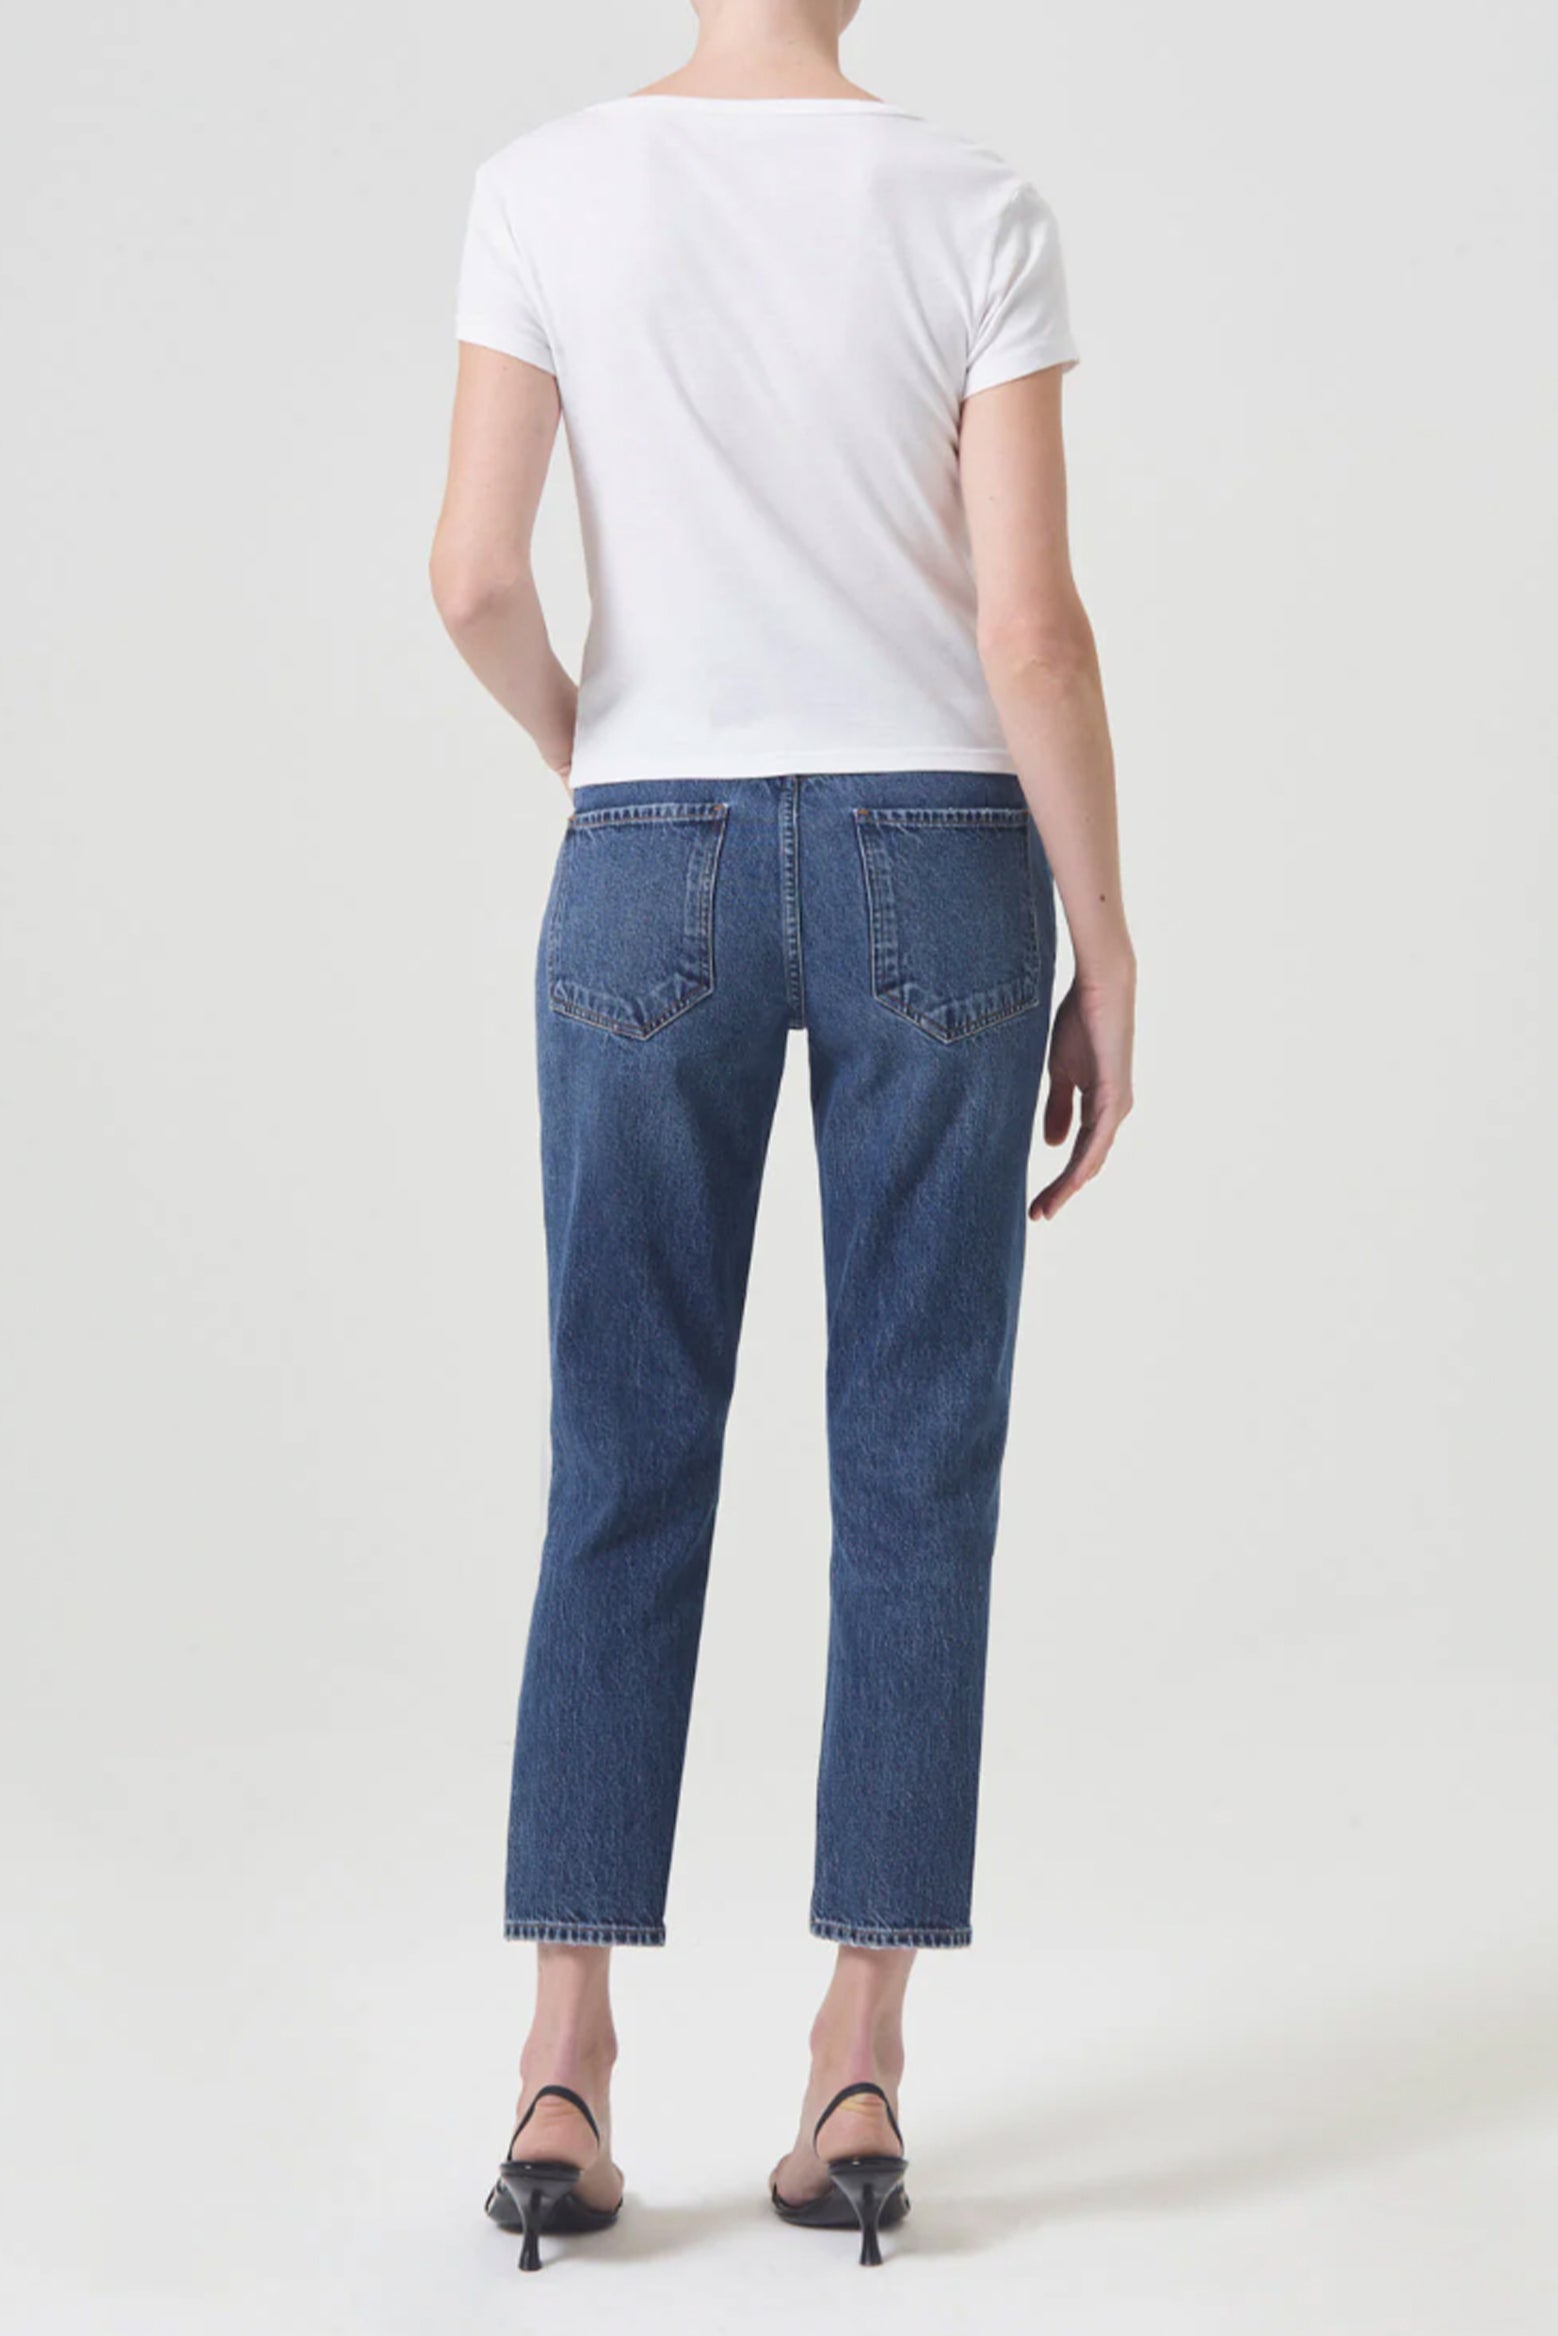 The Agolde Riley High Rise Straight Crop Jean in Control available at The New Trend Australia